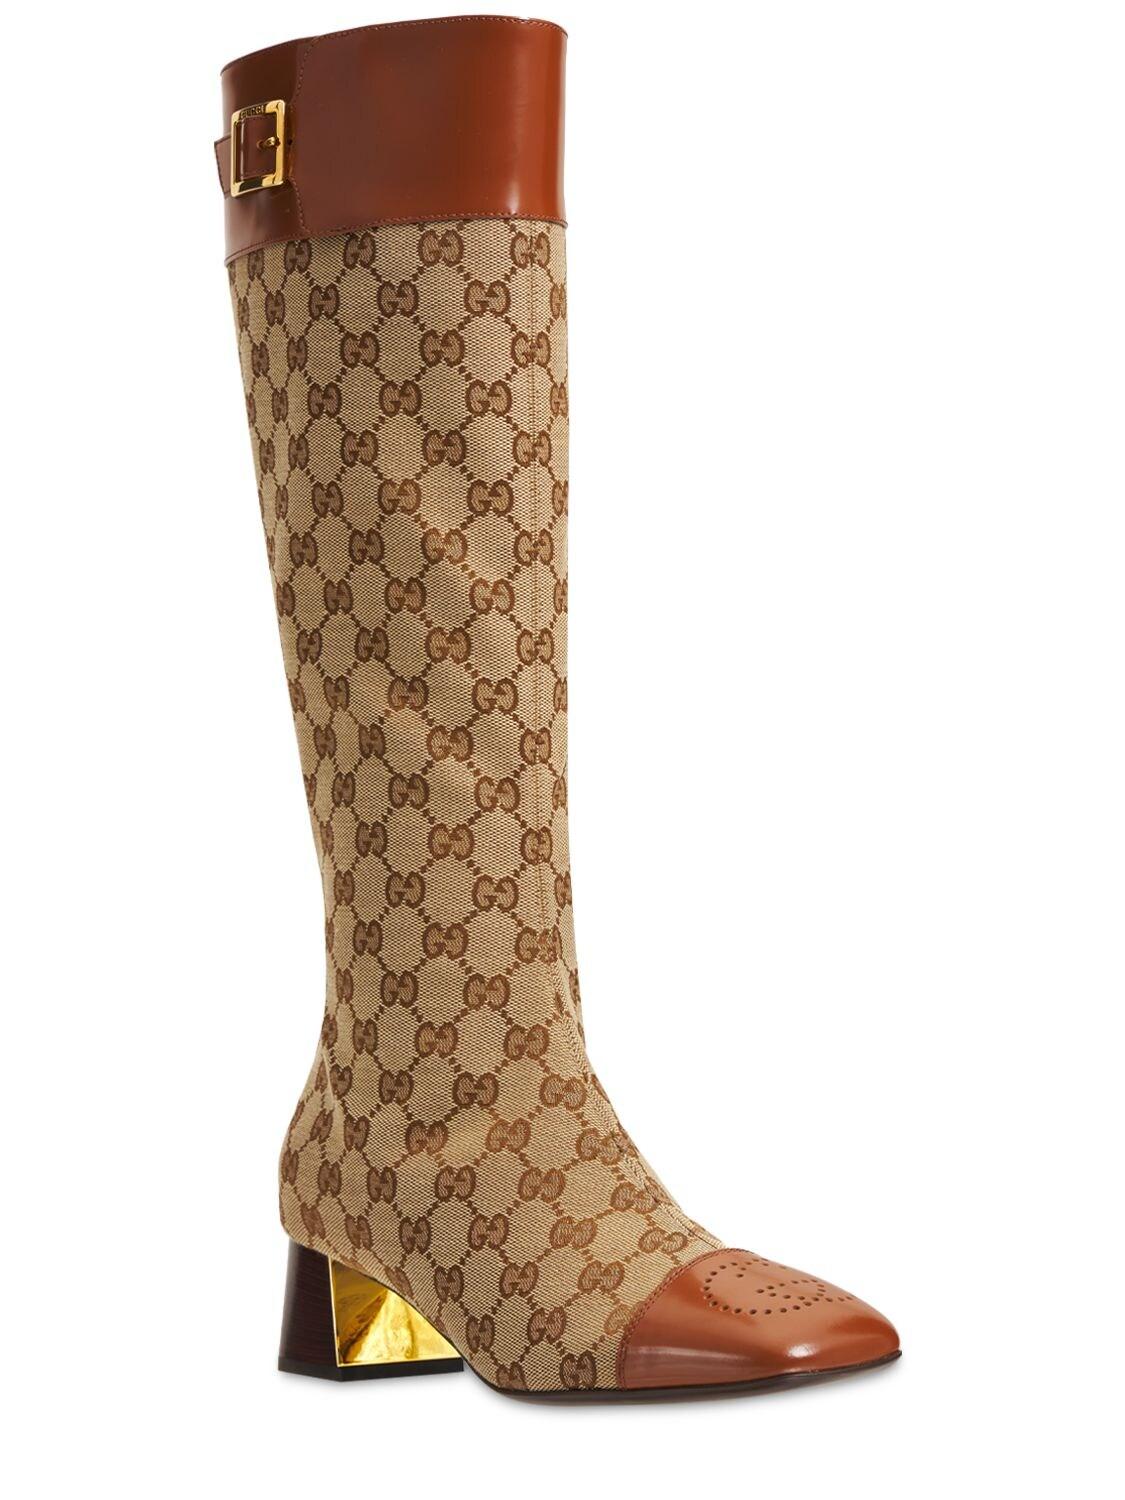 Gucci 45mm Ellis Tall Canvas & Leather Boots in Brown | Lyst